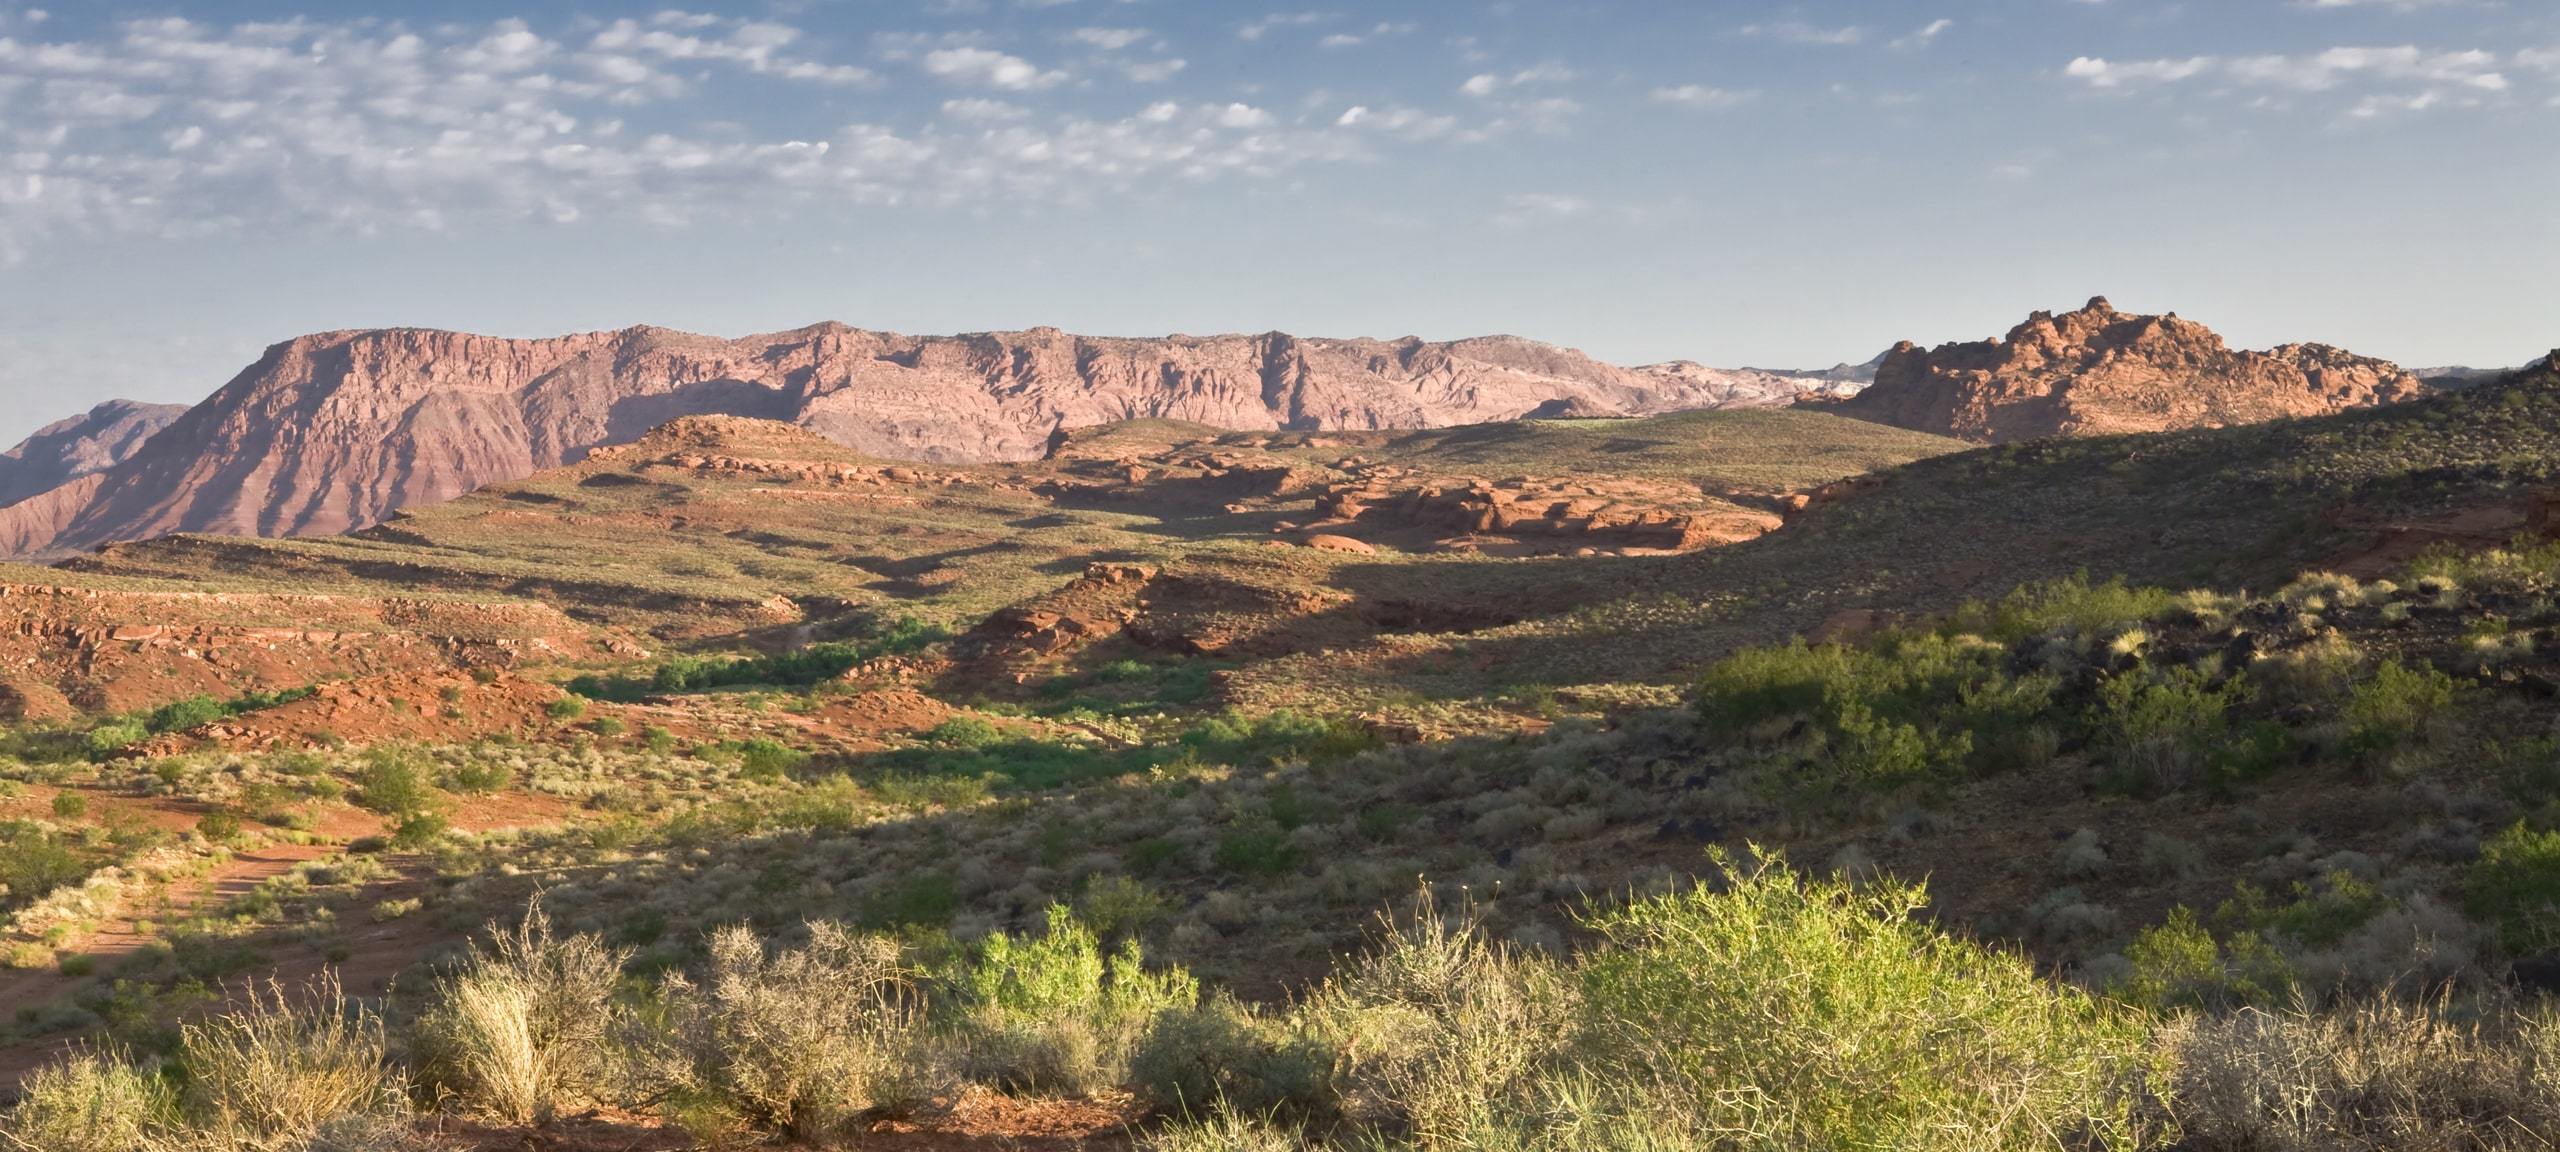 Beautiful sunrise over red bluffs and greenery in St. George, Utah